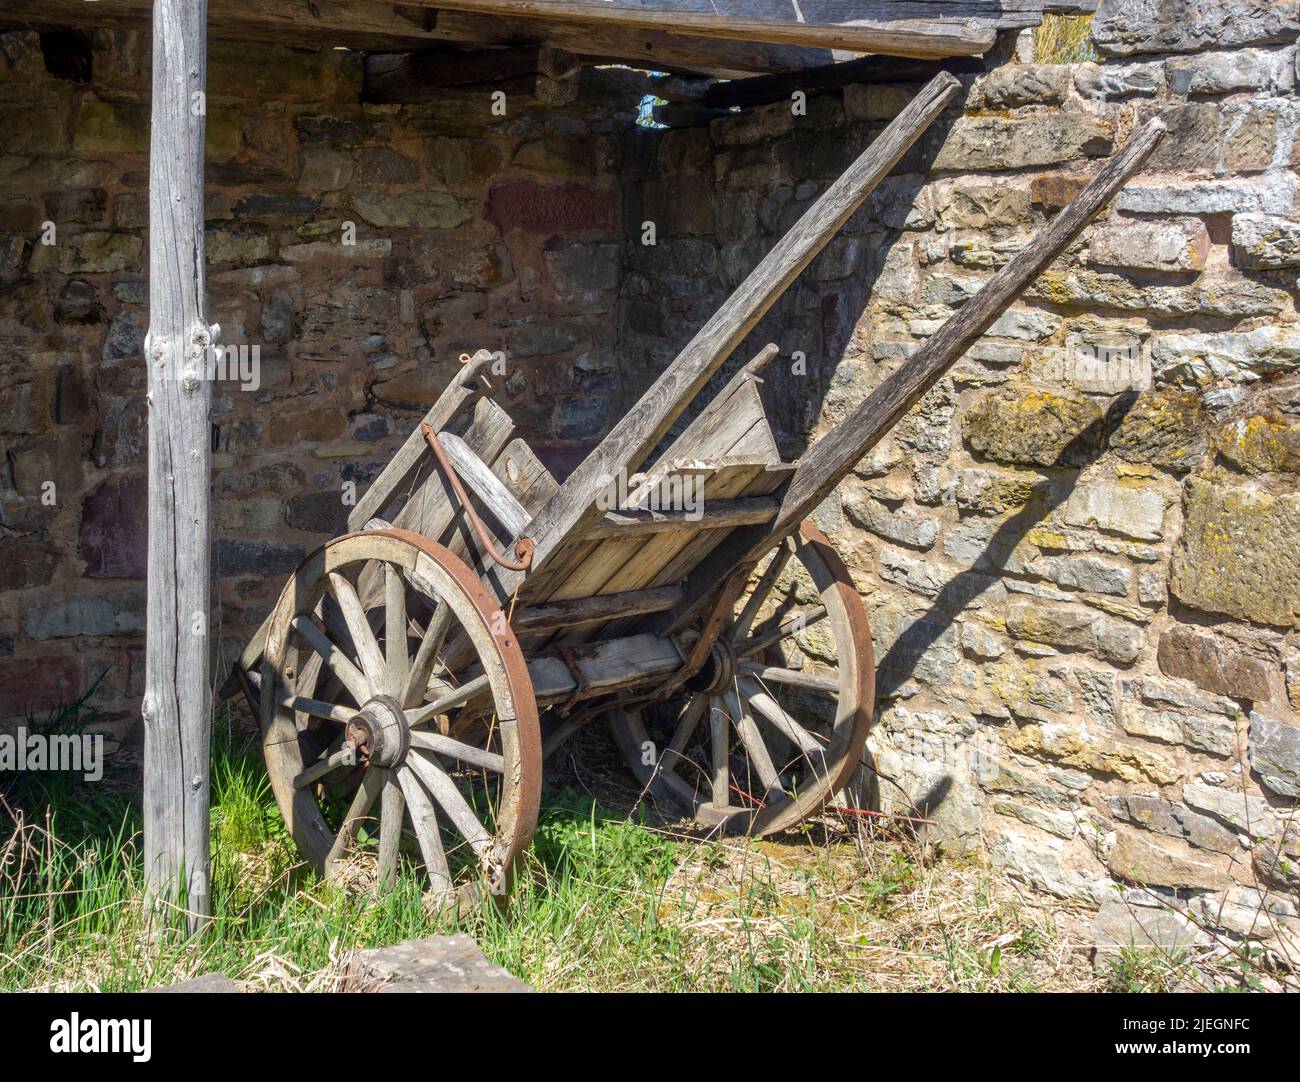 Medieval wooden cart at a stone wall in sunny ambiance Stock Photo